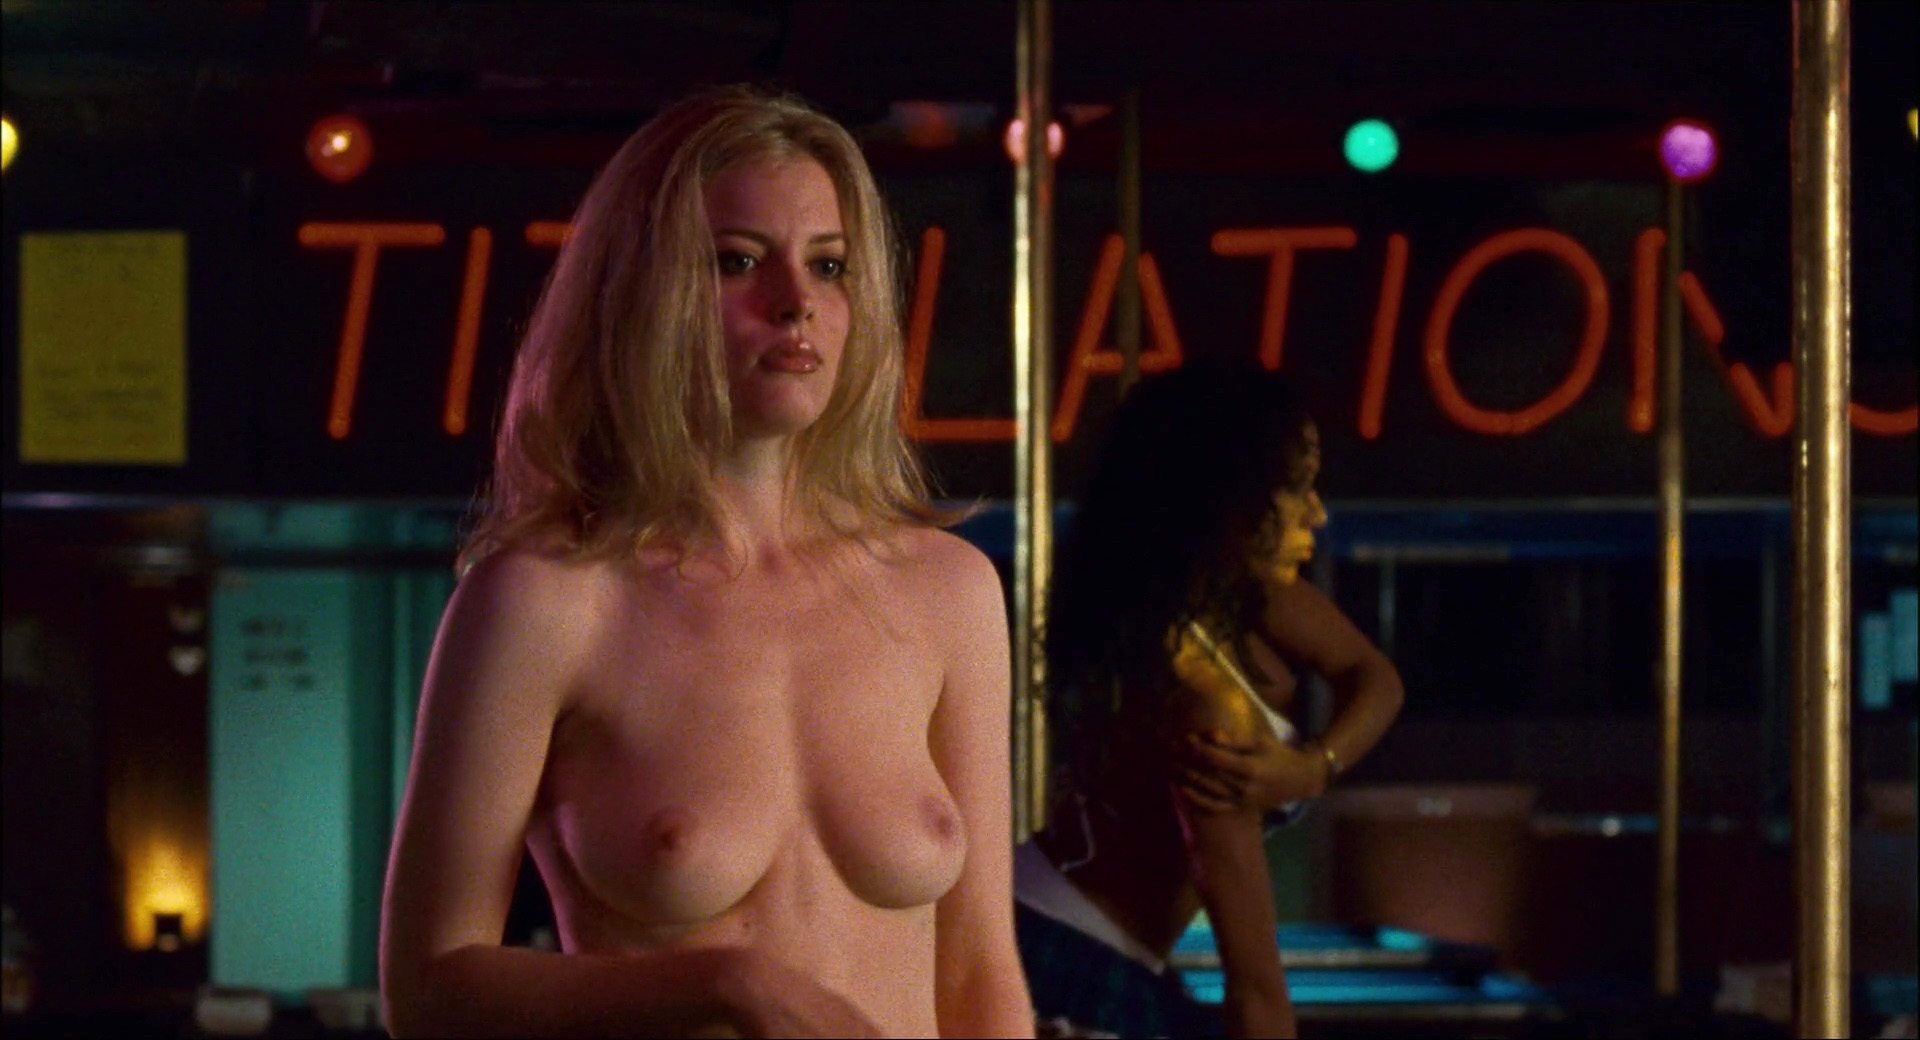 Gillian Jacobs Flashes Her Beautiful Breasts at a Strip Club